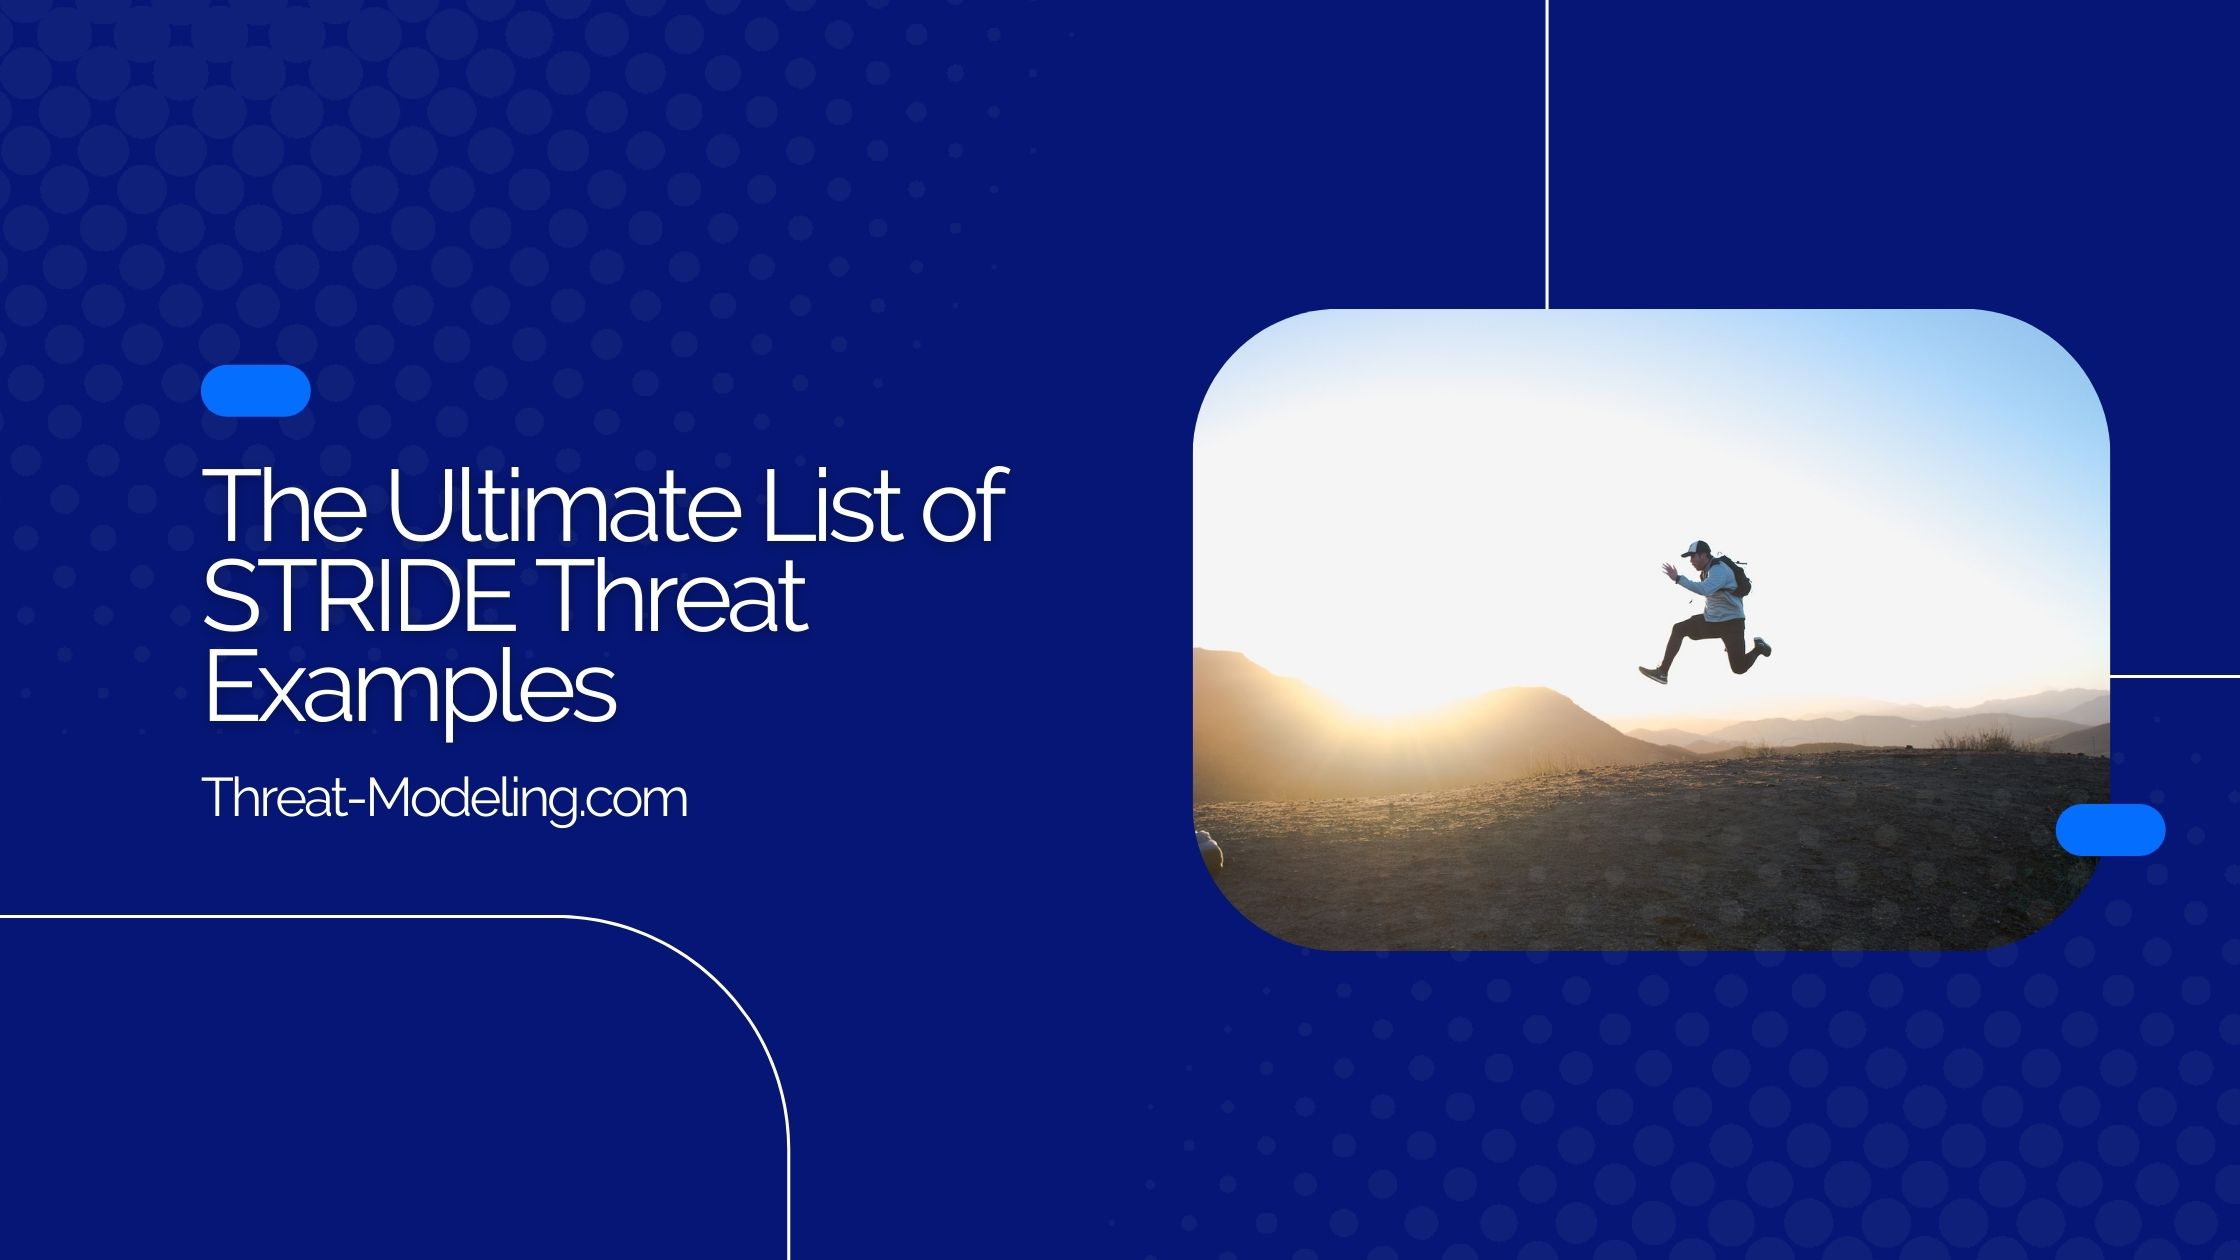 The Ultimate List of STRIDE Threat Examples